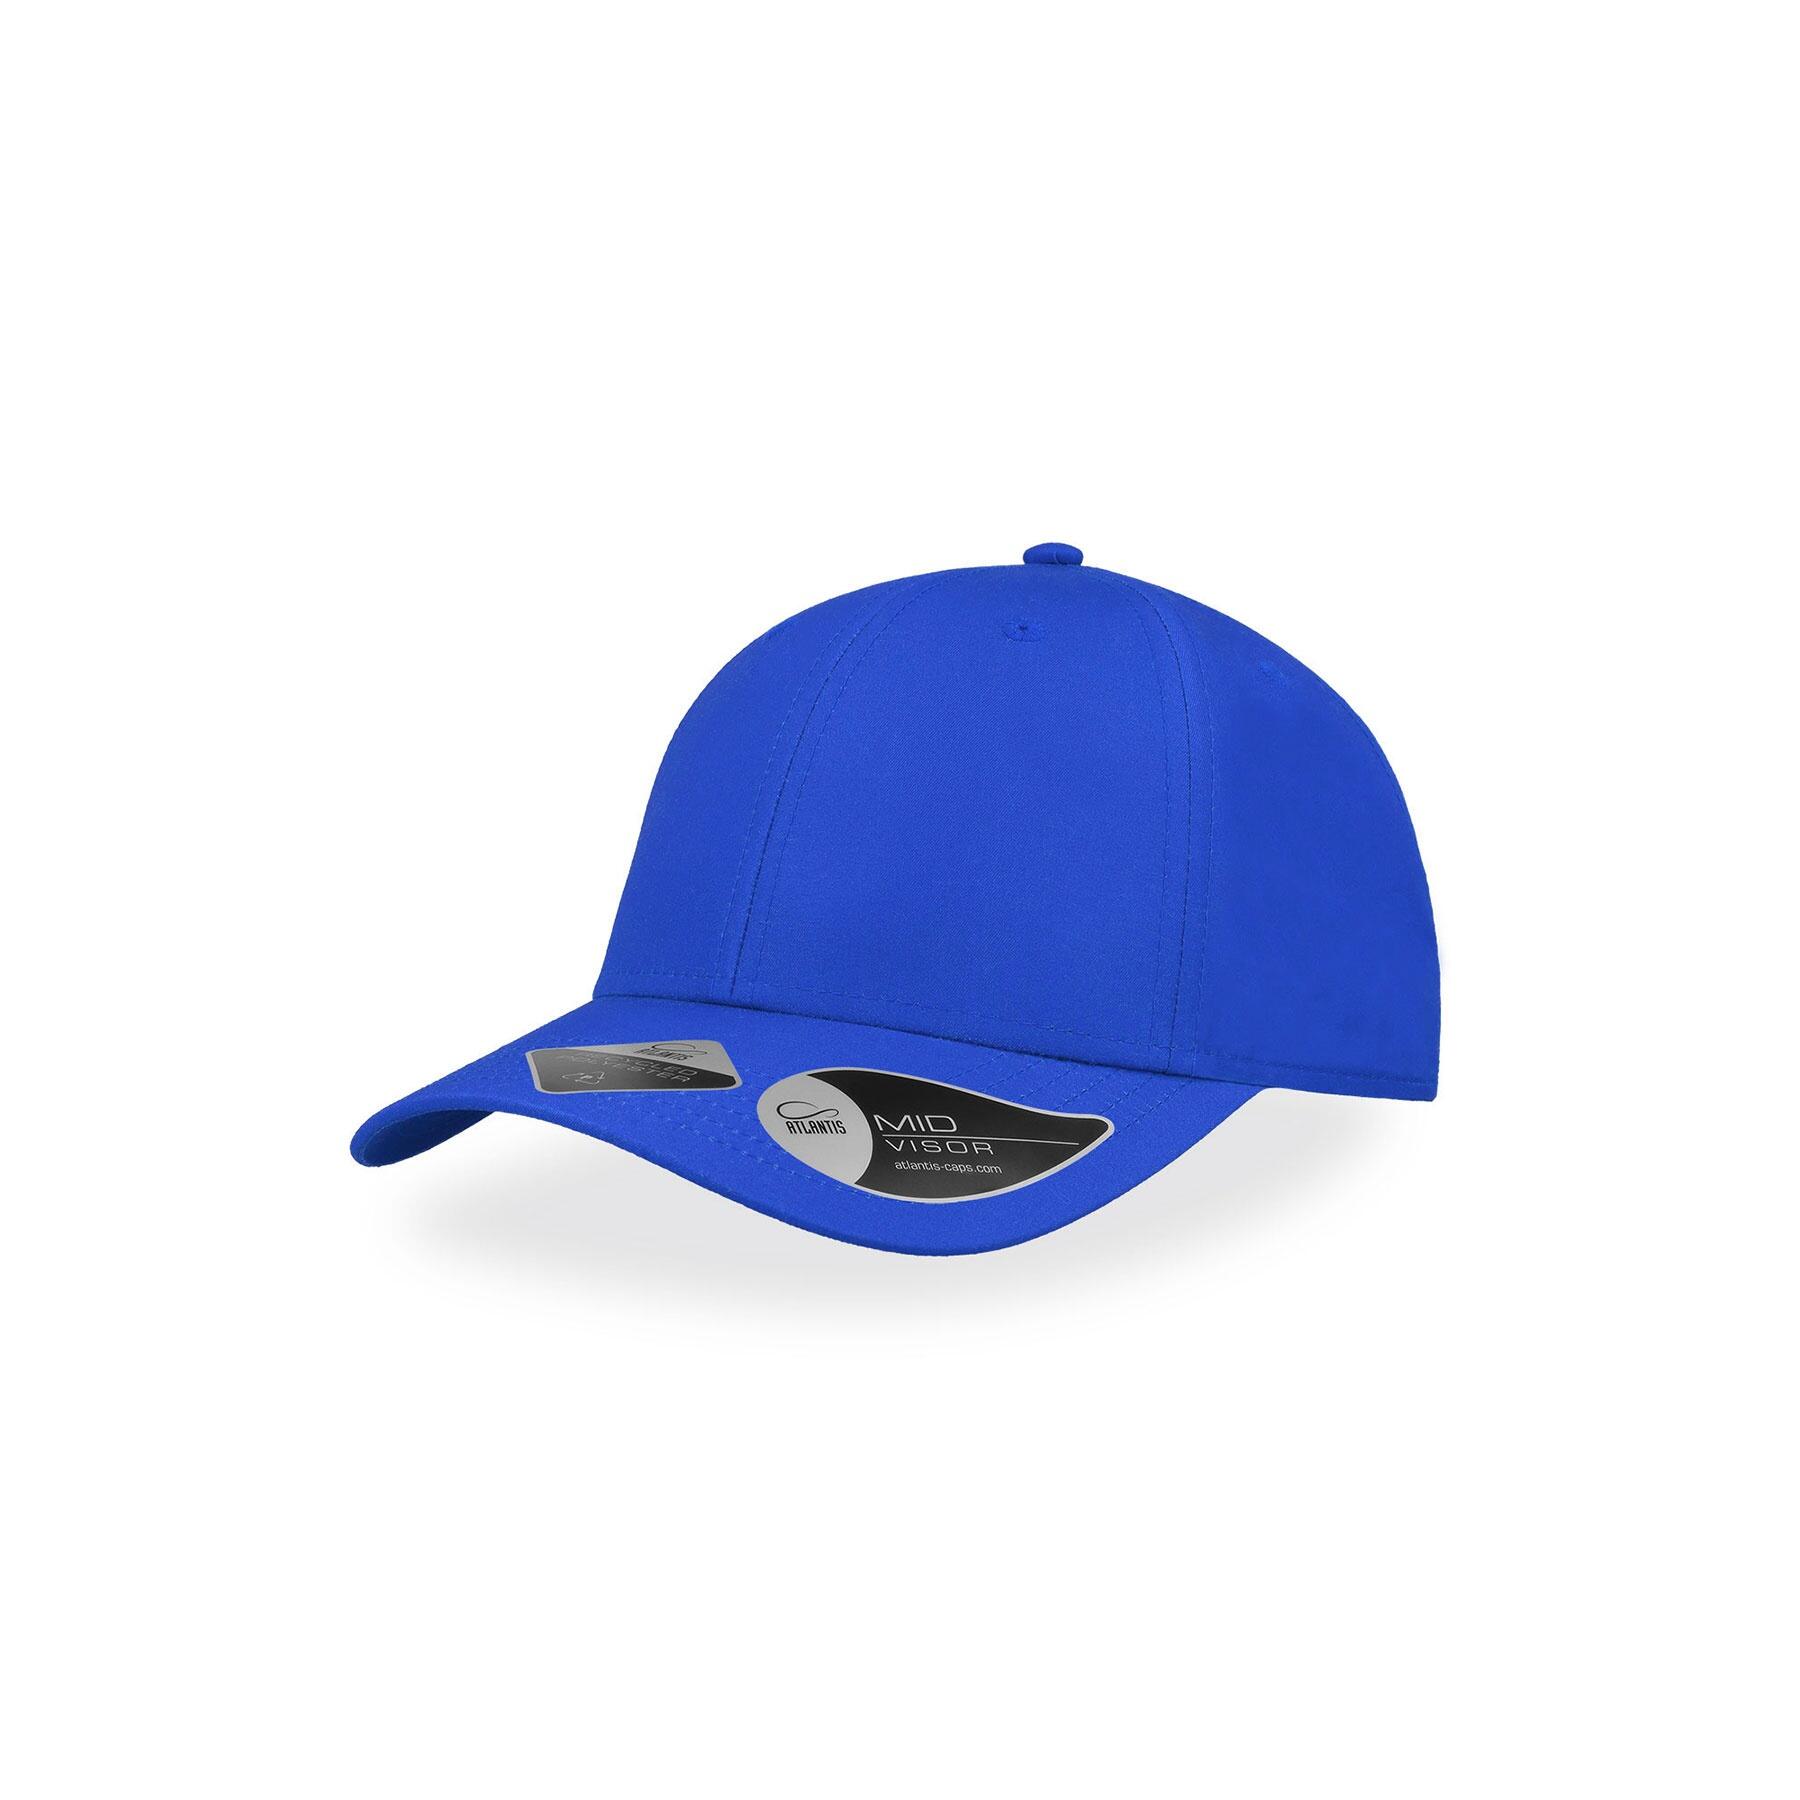 Recy Feel Recycled Twill Cap (Royal Blue) 1/3